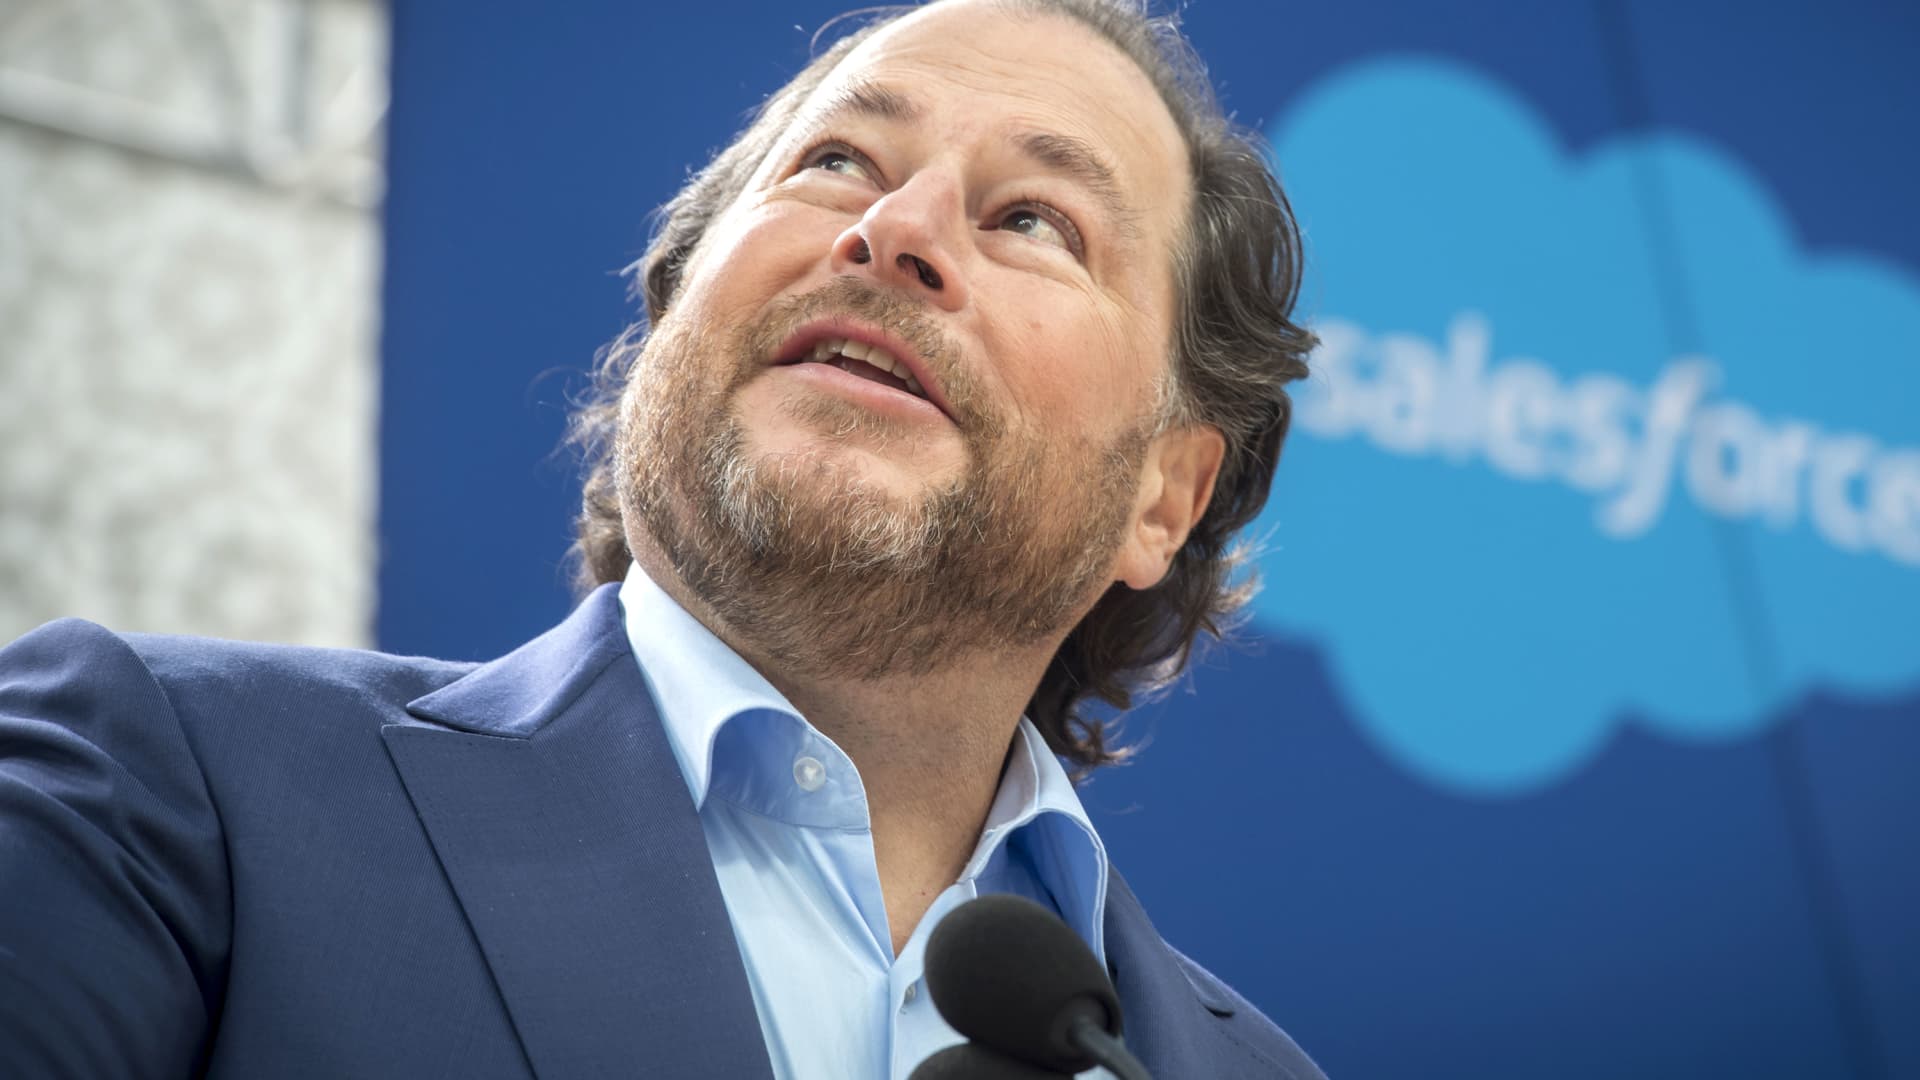 Marc Benioff, chairman and chief executive officer of Salesforce.com speaks during the grand opening ceremonies for the Salesforce Tower in San Francisco on May 22, 2018.